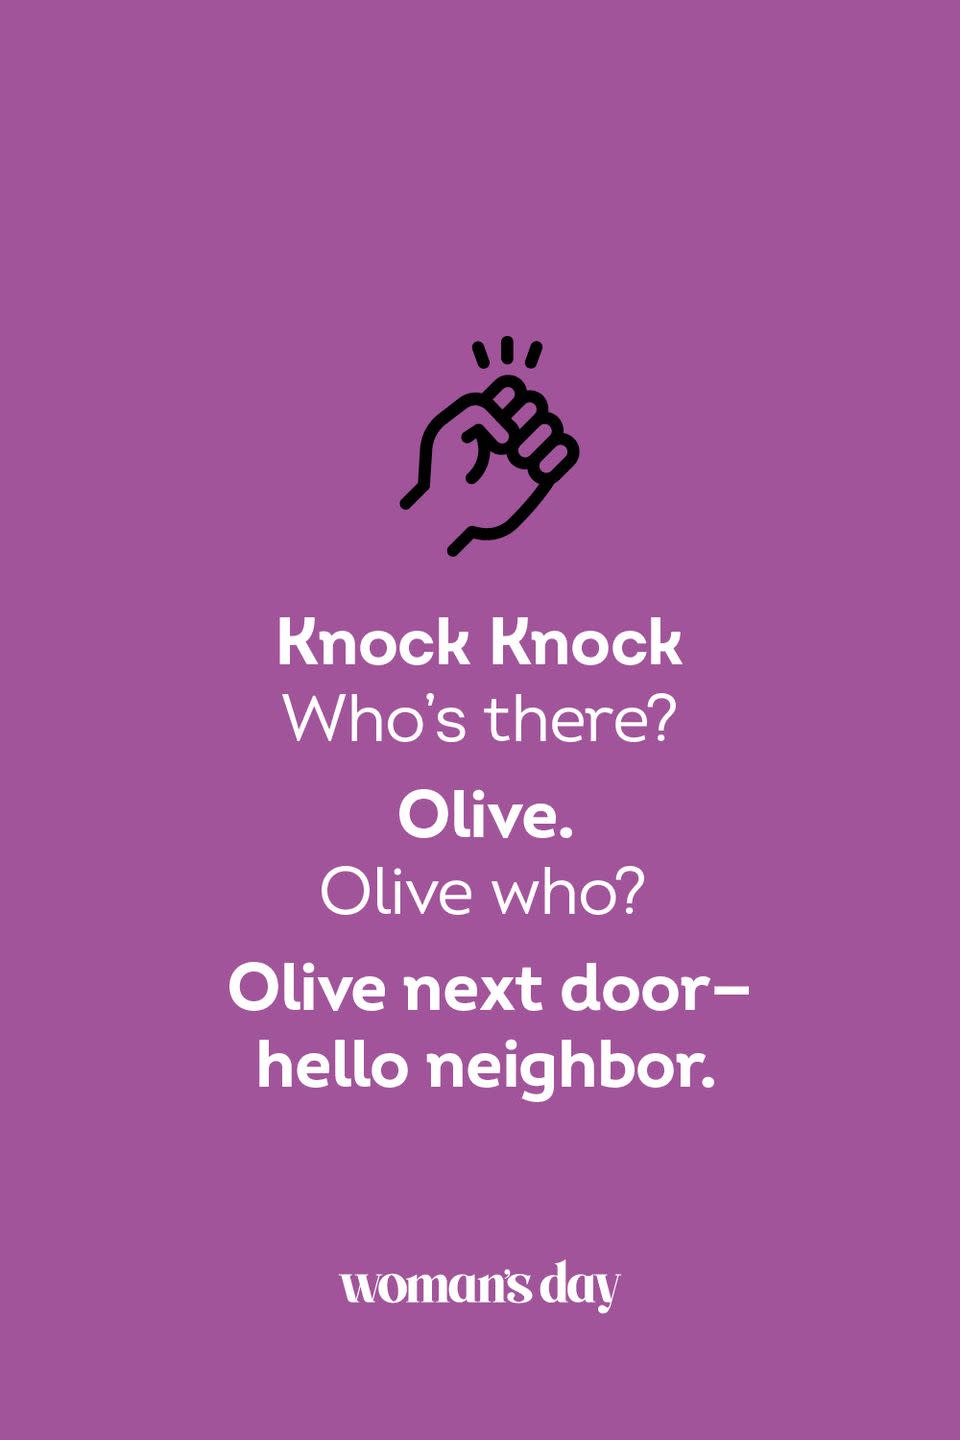 <p><strong>Knock Knock</strong></p><p><em>Who’s there? </em></p><p><strong>Olive.</strong></p><p><em>Olive who?</em></p><p><strong>Olive next door — hello neighbor.</strong></p>